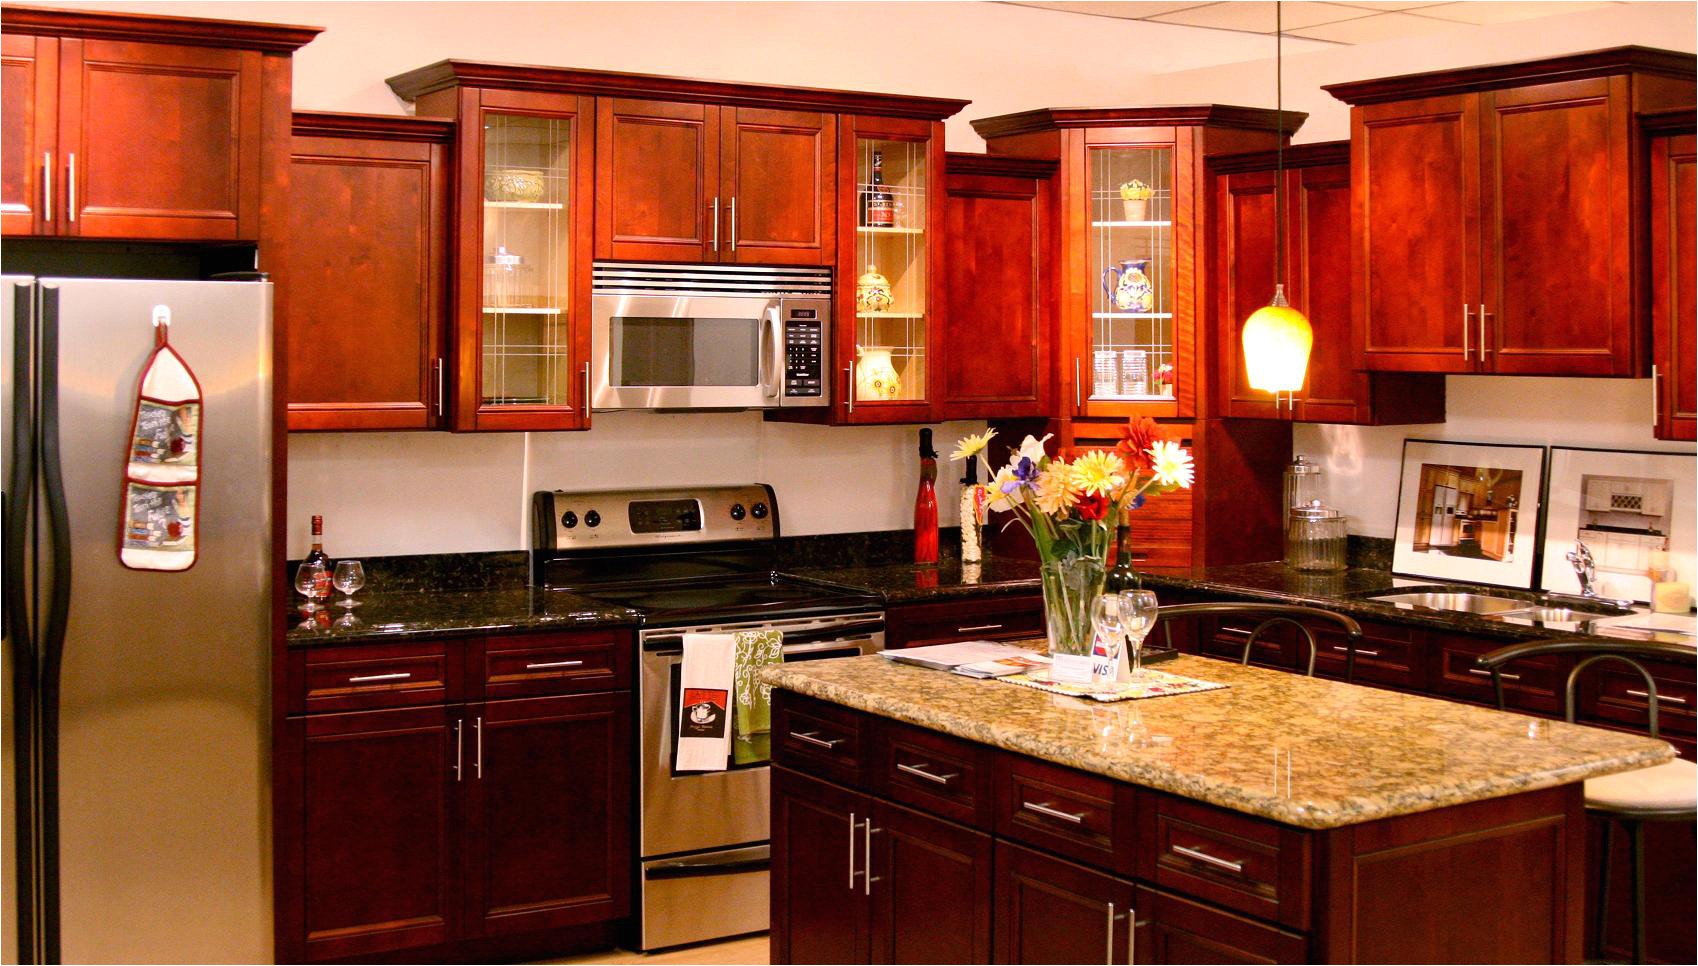 full size of kitchen custom kitchen cabinets design companies kitchen northern glass lowes trends home